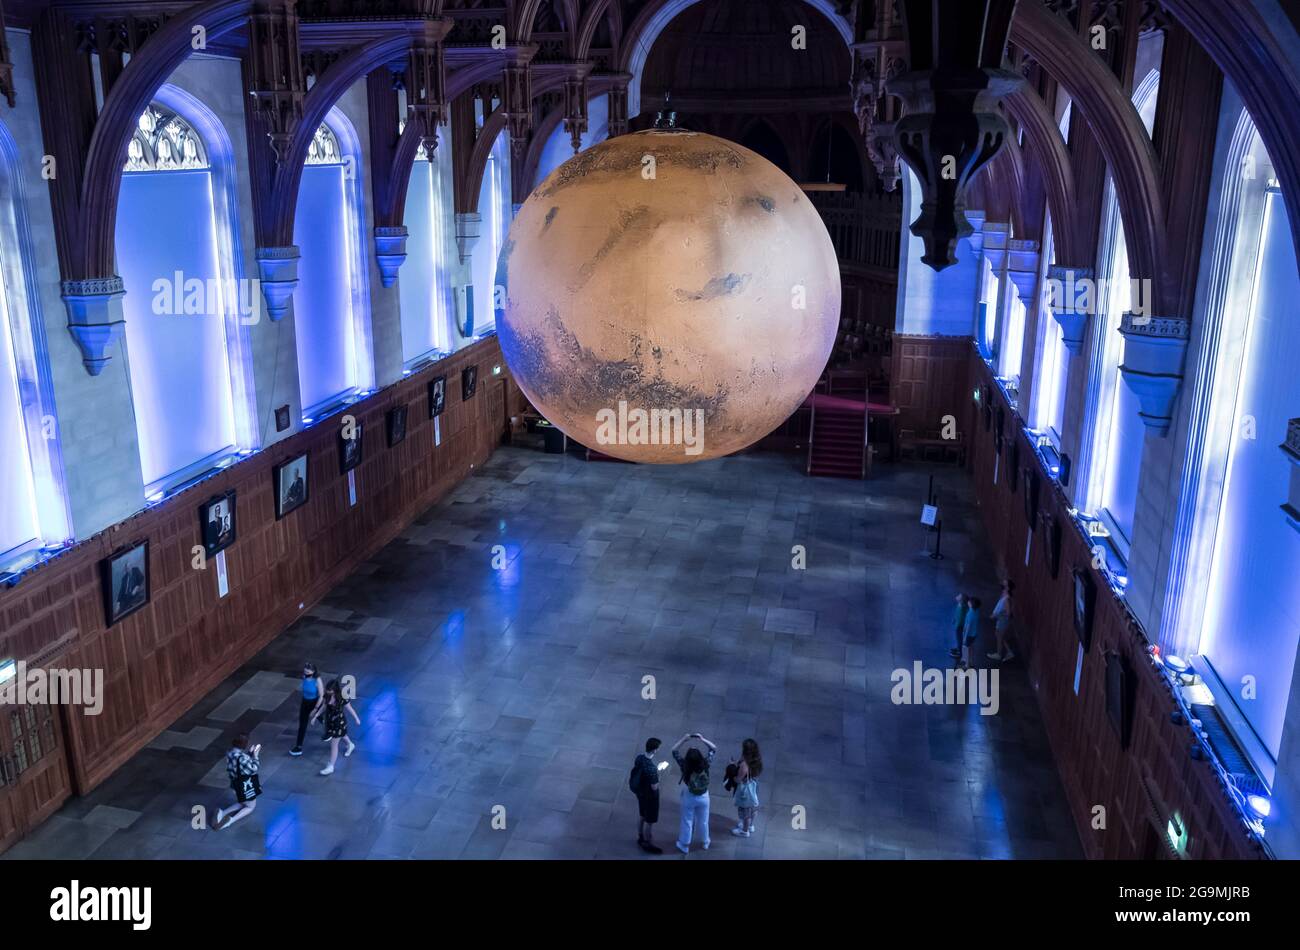 Bristol, UK. 27th July, 2021. Luke Jerram shows his seven-metre model of Mars in the Great Hall of the Wills Memorial Building Bristol University. Using NASA imagery, the model allows people to see the mountains, valleys and craters of our neighbour the Red Planet. The exhibition will be open to the public, staff and students from 27th July to 1st August. Credit: JMF News/Alamy Live News Stock Photo